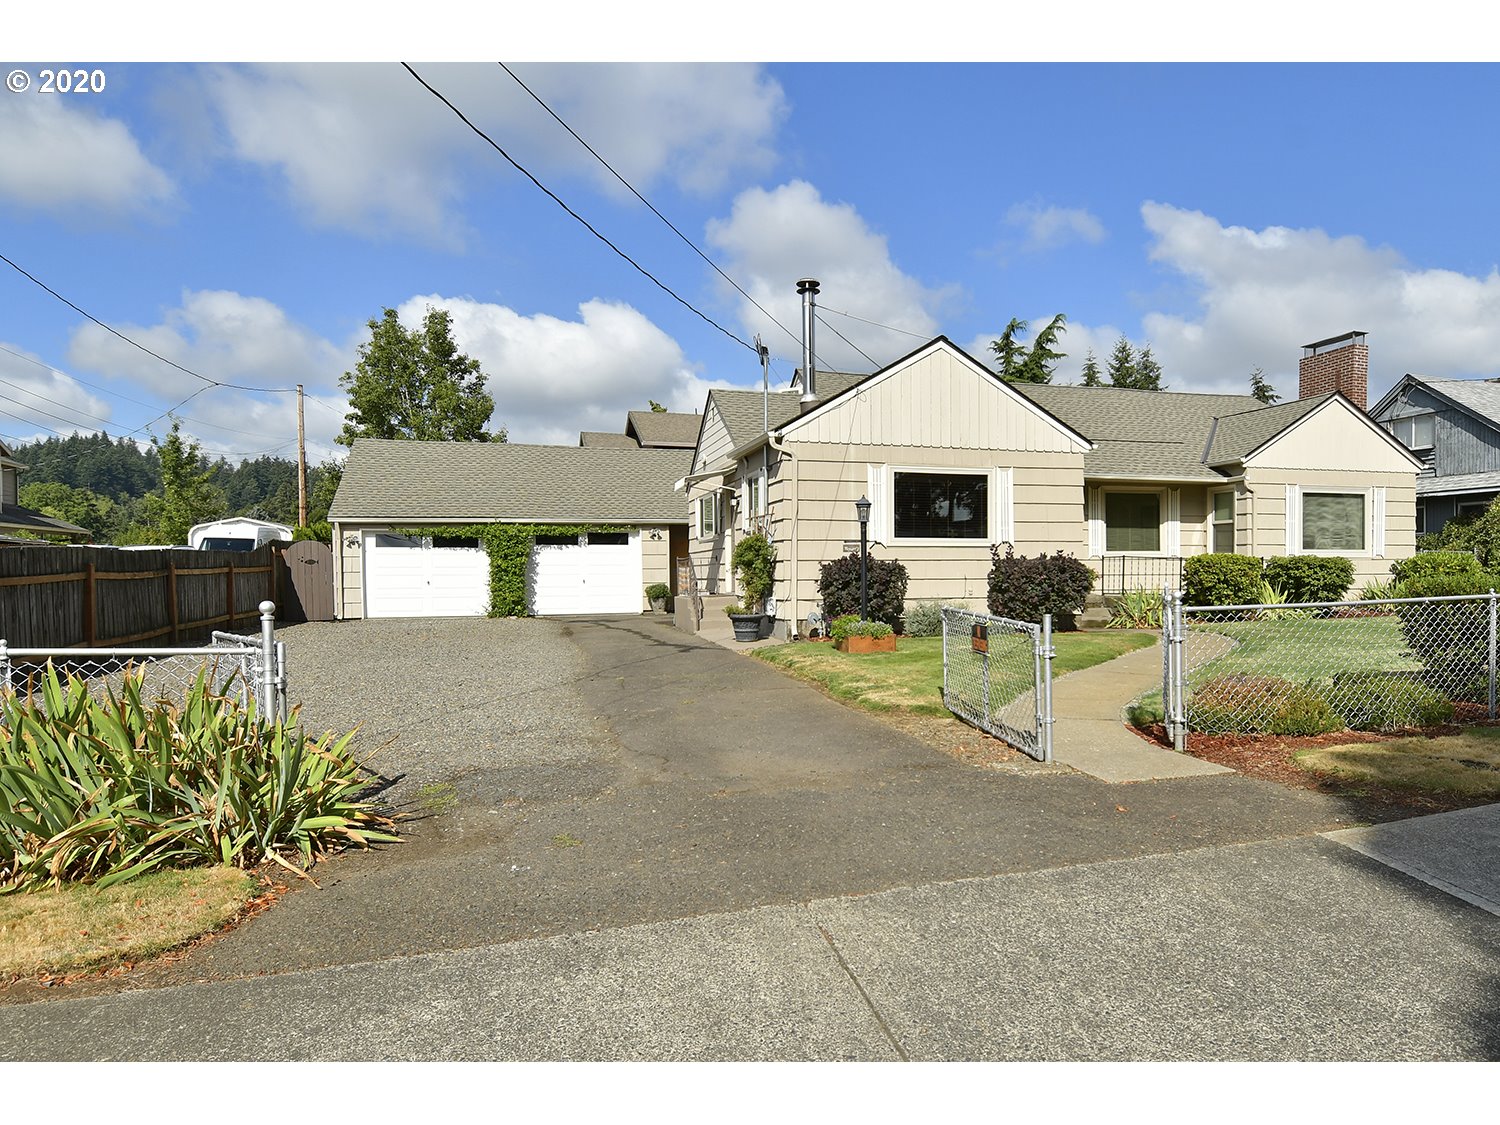 can-you-still-buy-a-house-in-portland-for-under-350k-living-room